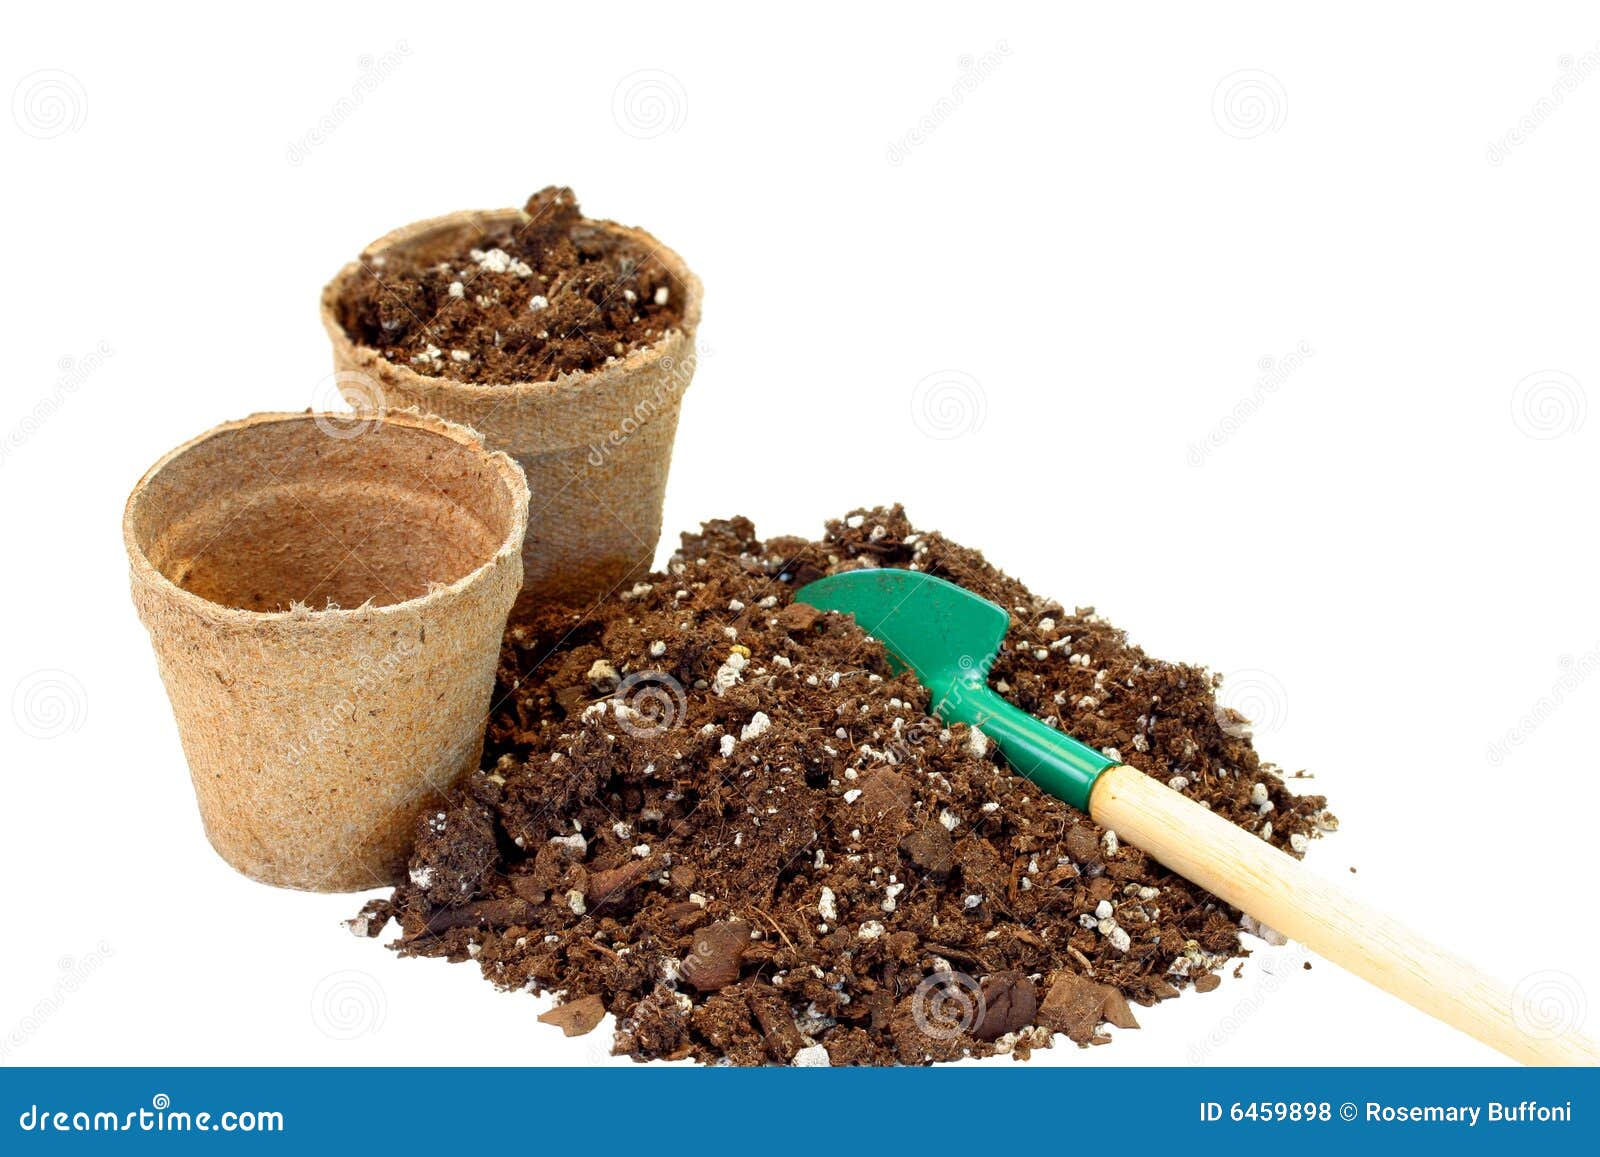 peat pots and soil